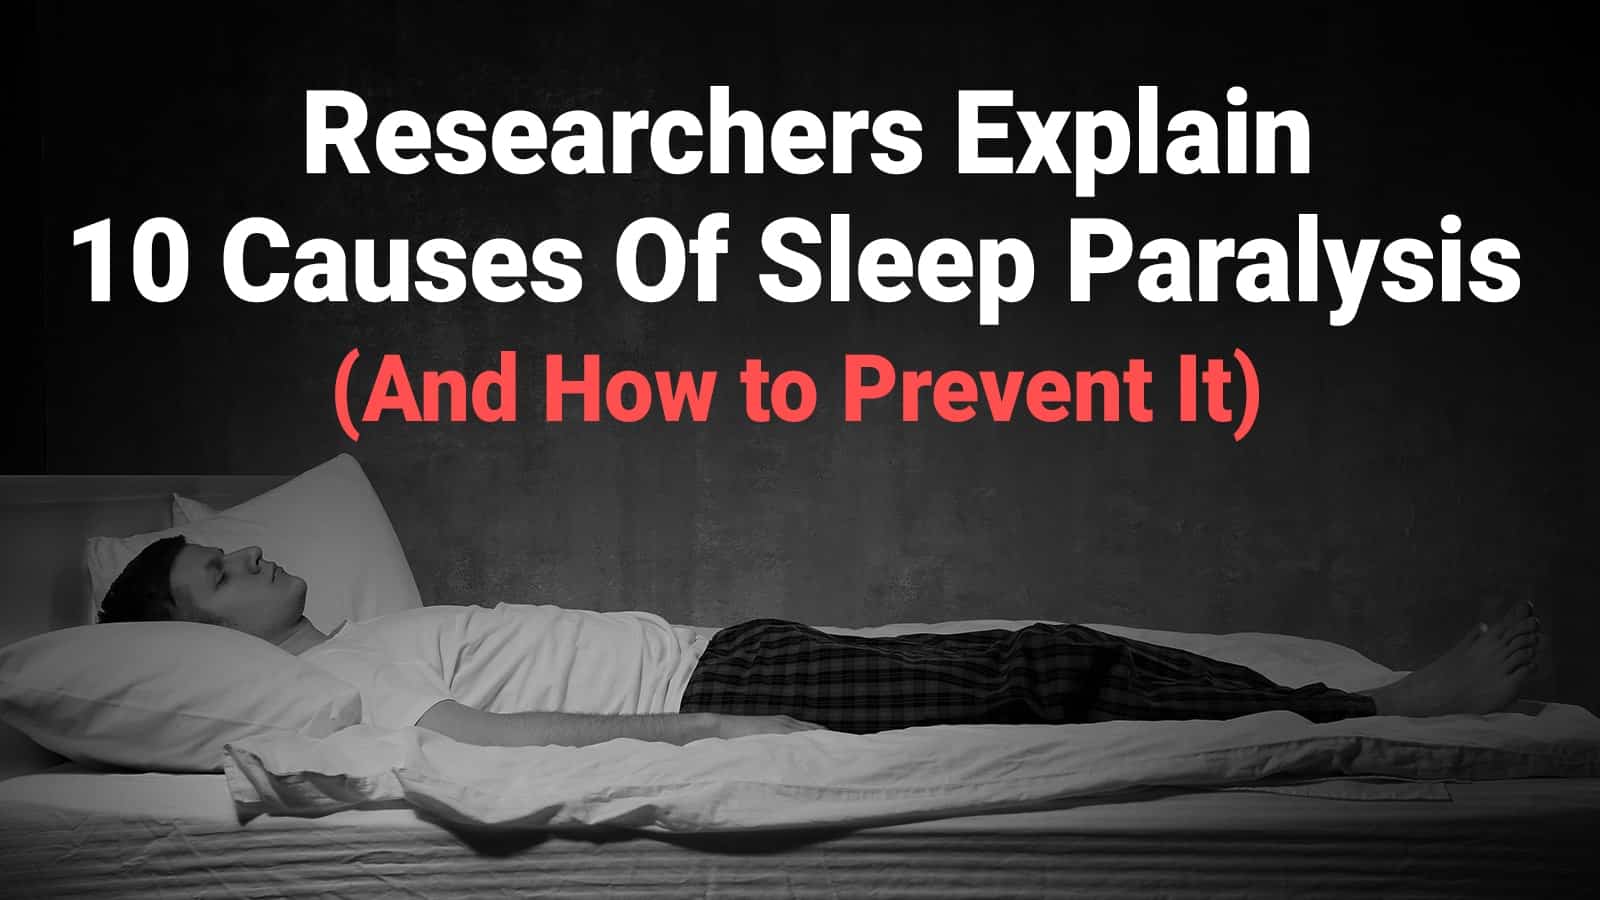 Researchers Explain 10 Causes Of Sleep Paralysis (And How to Prevent It)